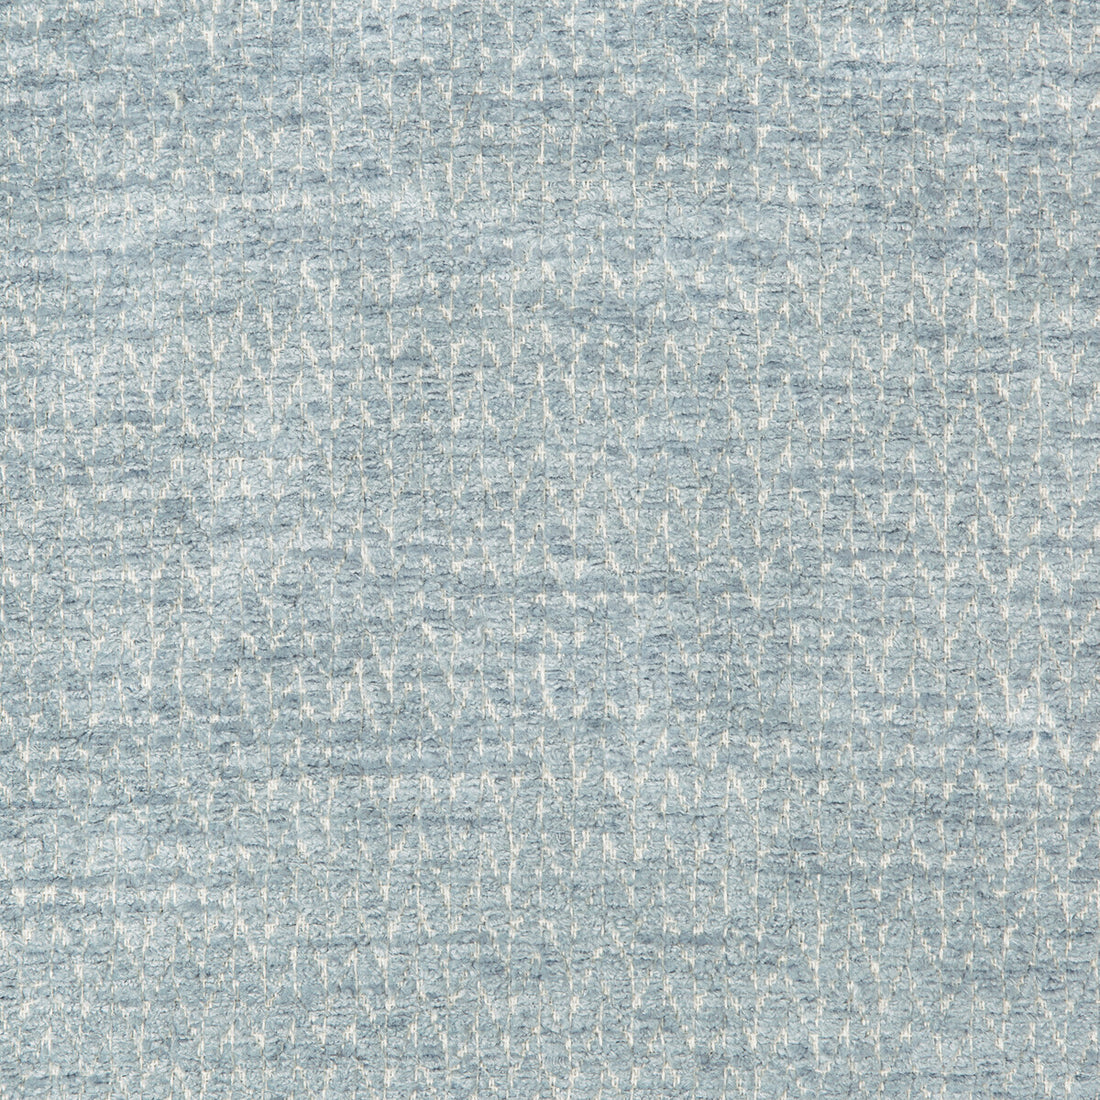 Cassien Texture fabric in sky color - pattern 8019146.5.0 - by Brunschwig &amp; Fils in the Chambery Textures II collection